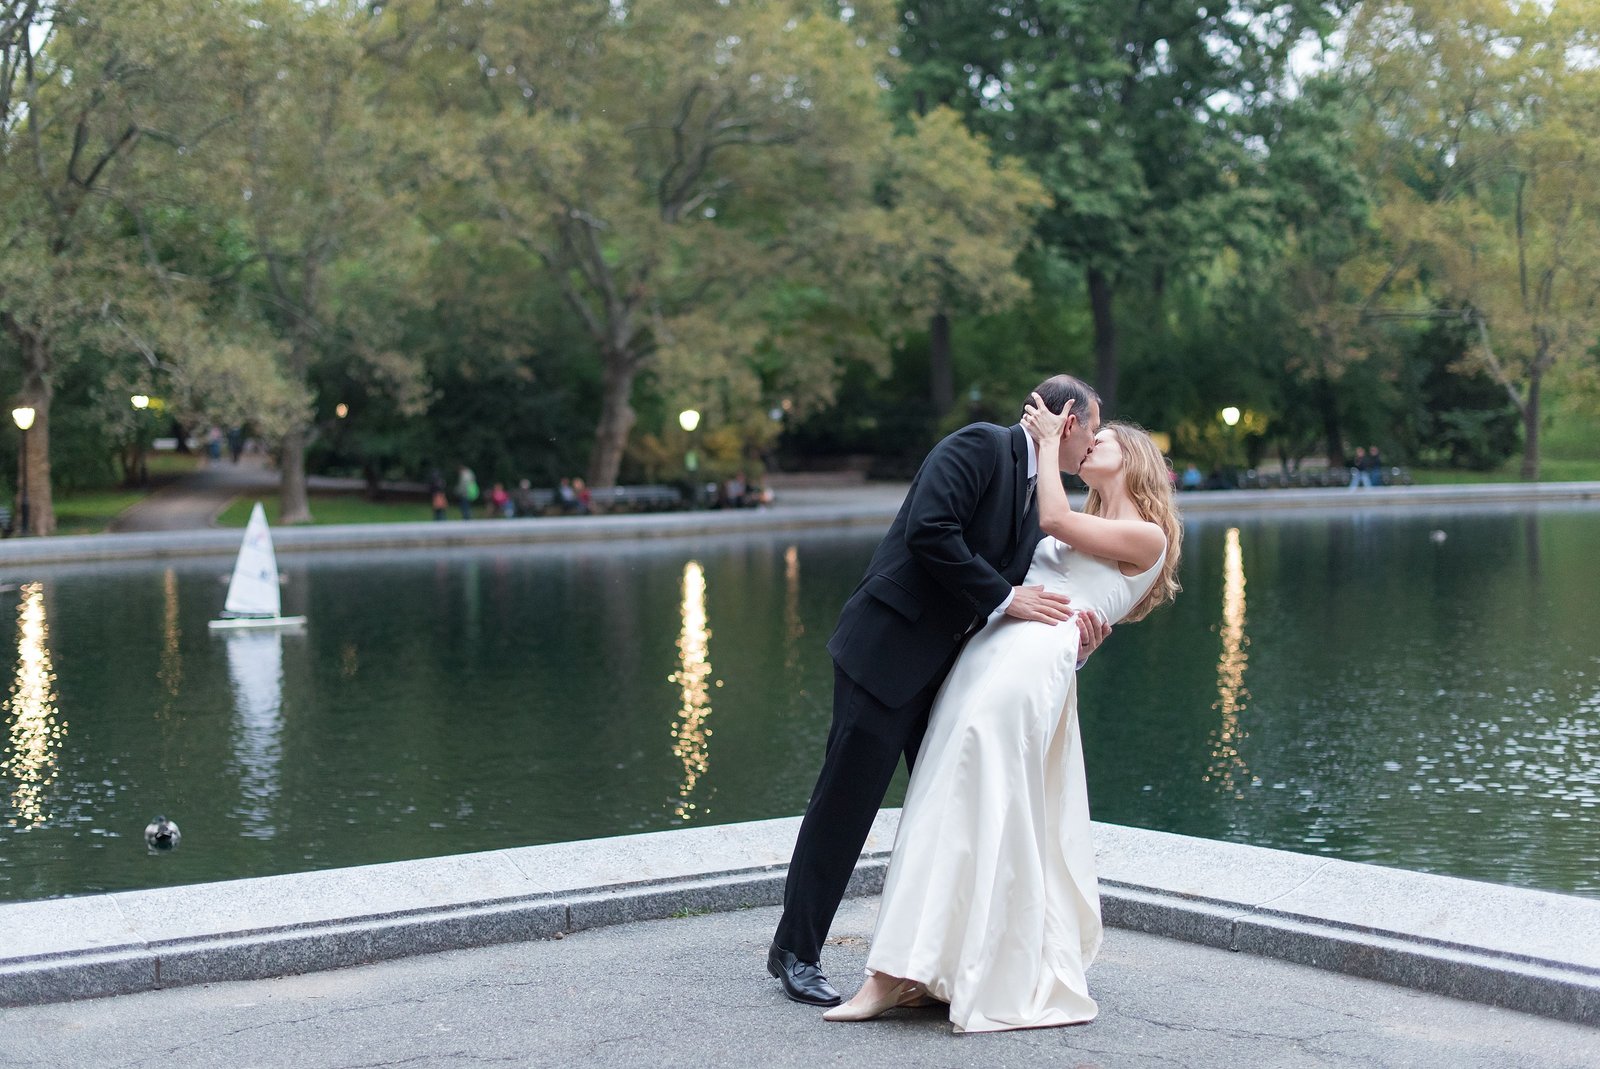 Groom dipping and Kissing Bride in front of pond with little boats at Conservatory Water in Central Park, New York City Photo